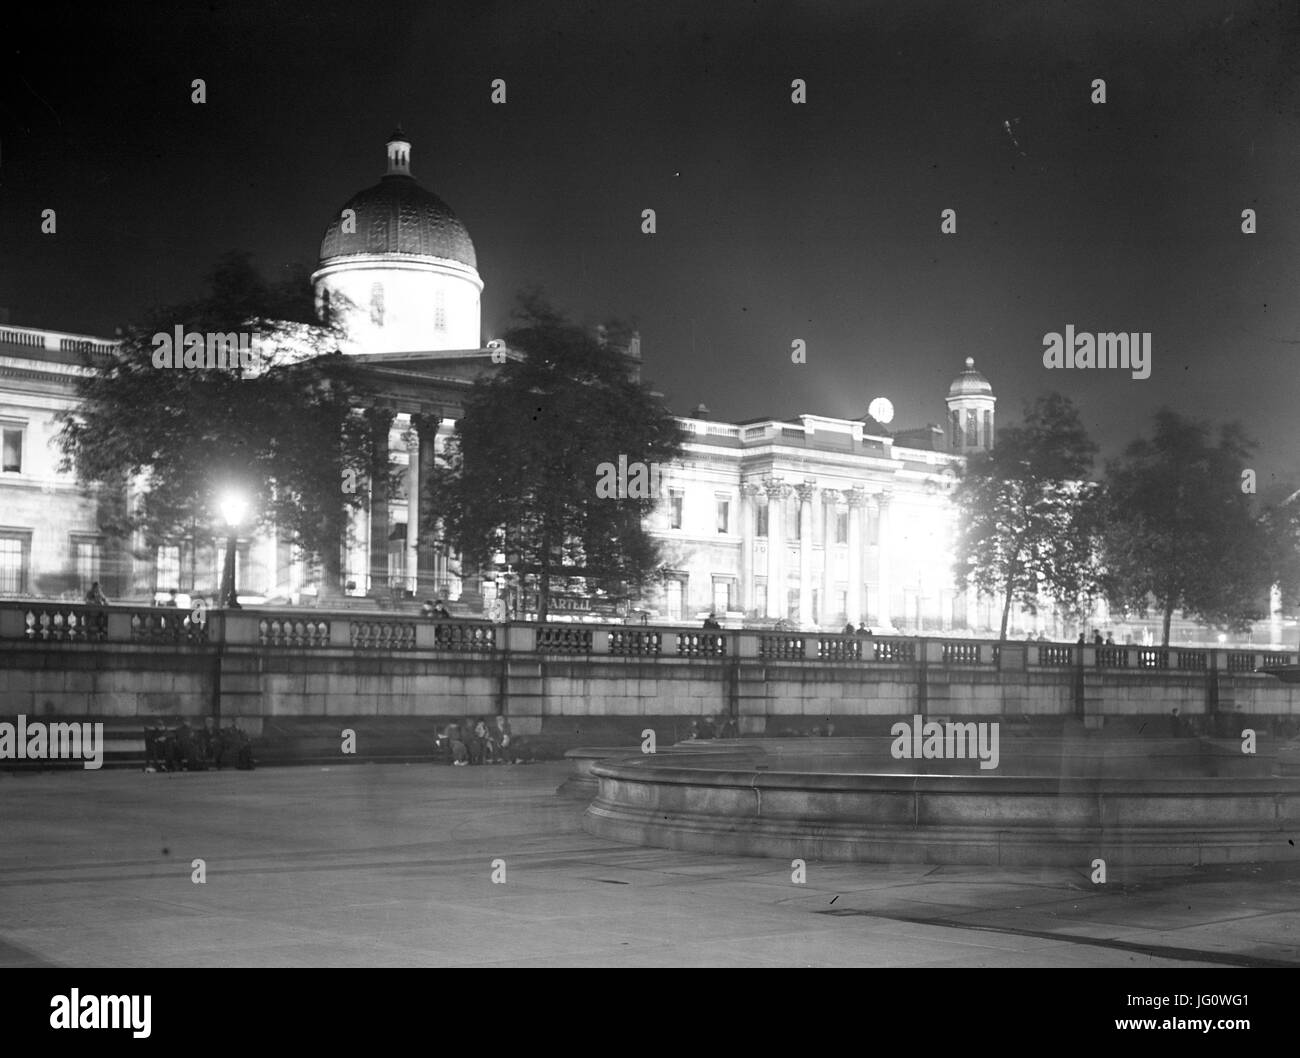 Looking across Trafalgar Square towards the National Gallery and St Martin-in-the-Fields Church in London. Stock Photo